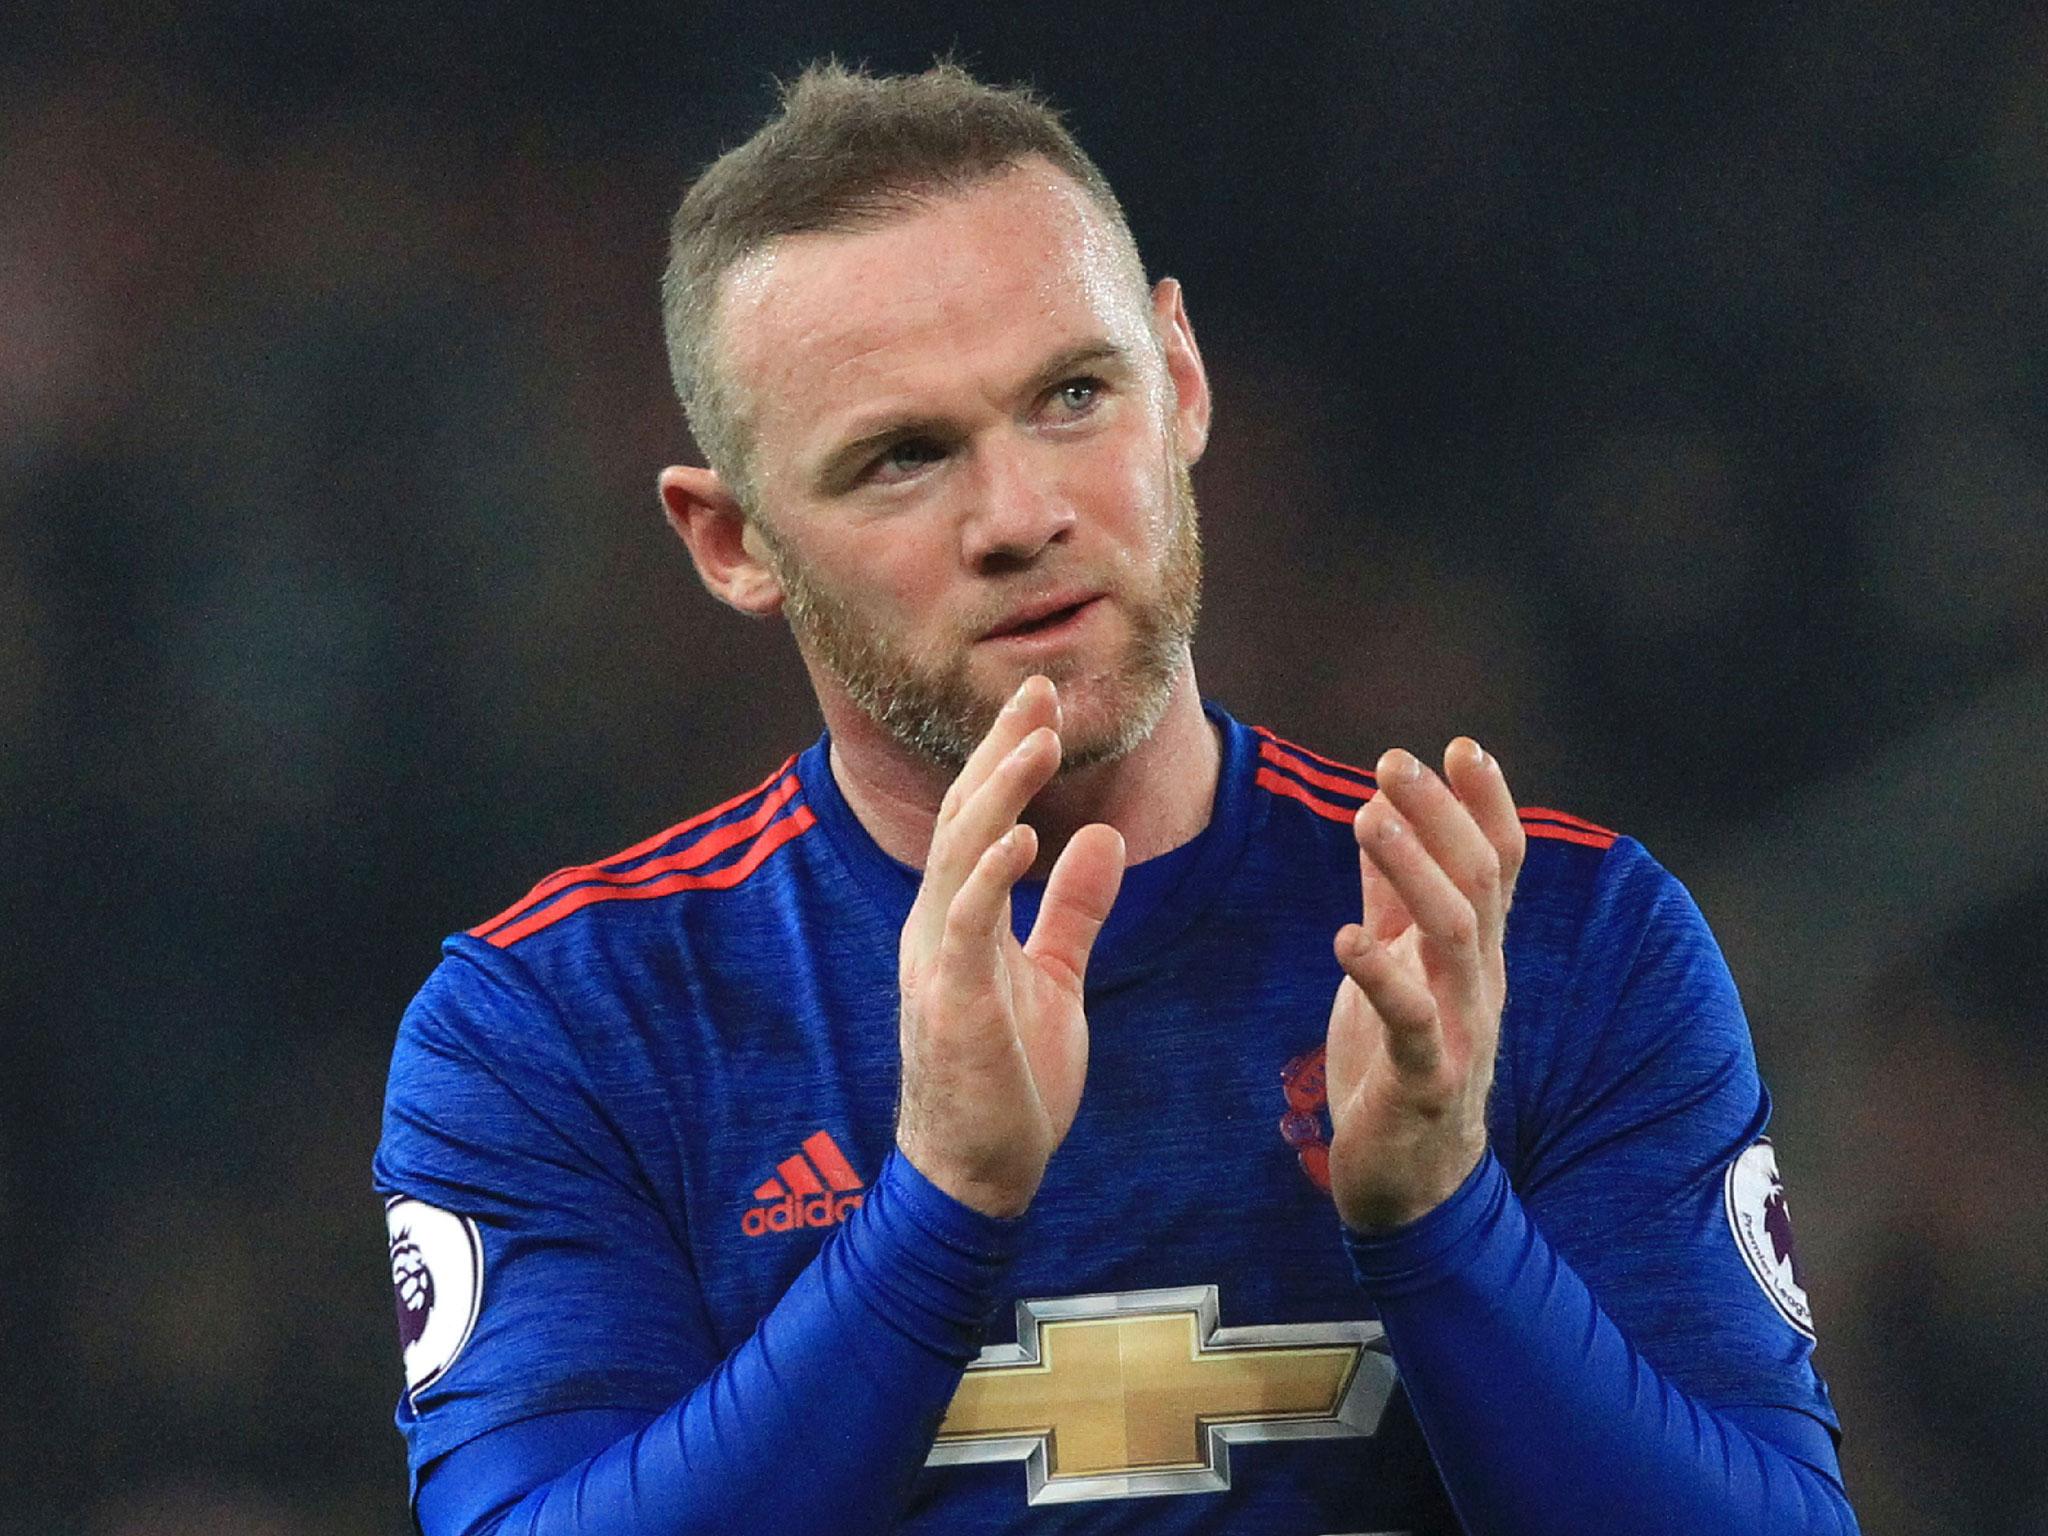 Wayne Rooney applauds the Manchester United fans after his record-breaking 250th goal